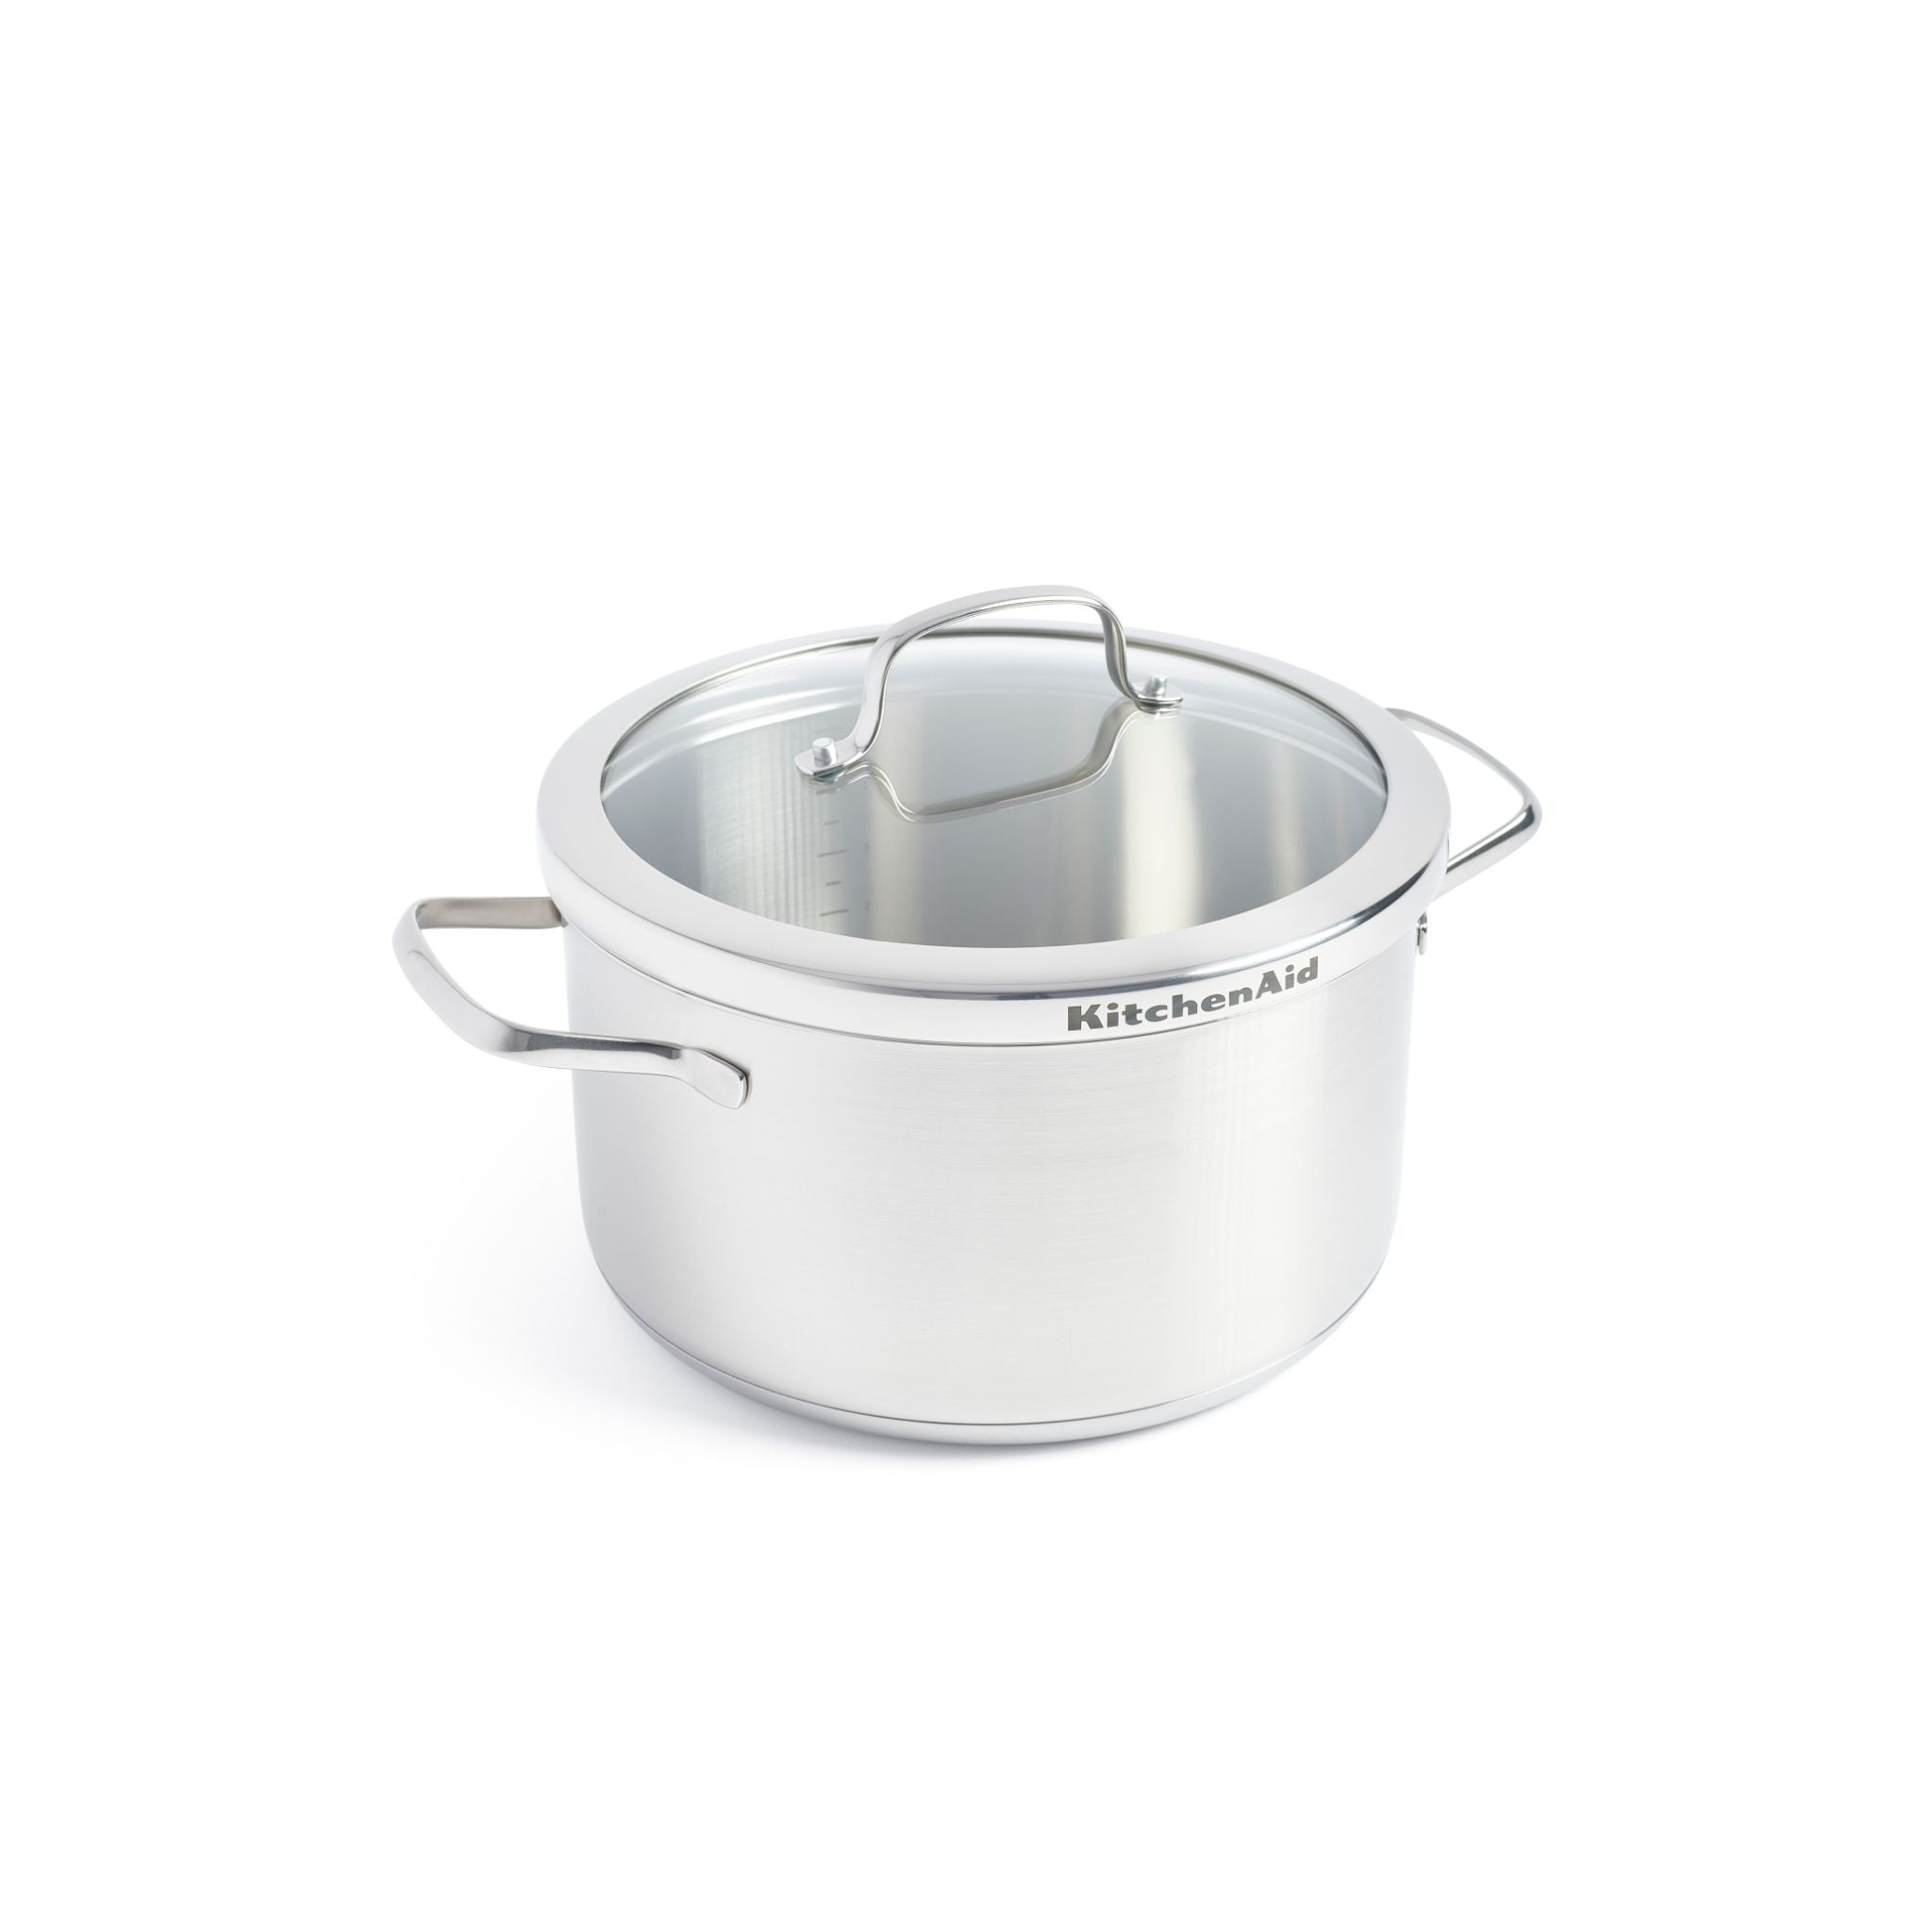 KitchenAid Stainless Steel Pro Casserole with Lid 24cm/5.7 L (GPKA656111)